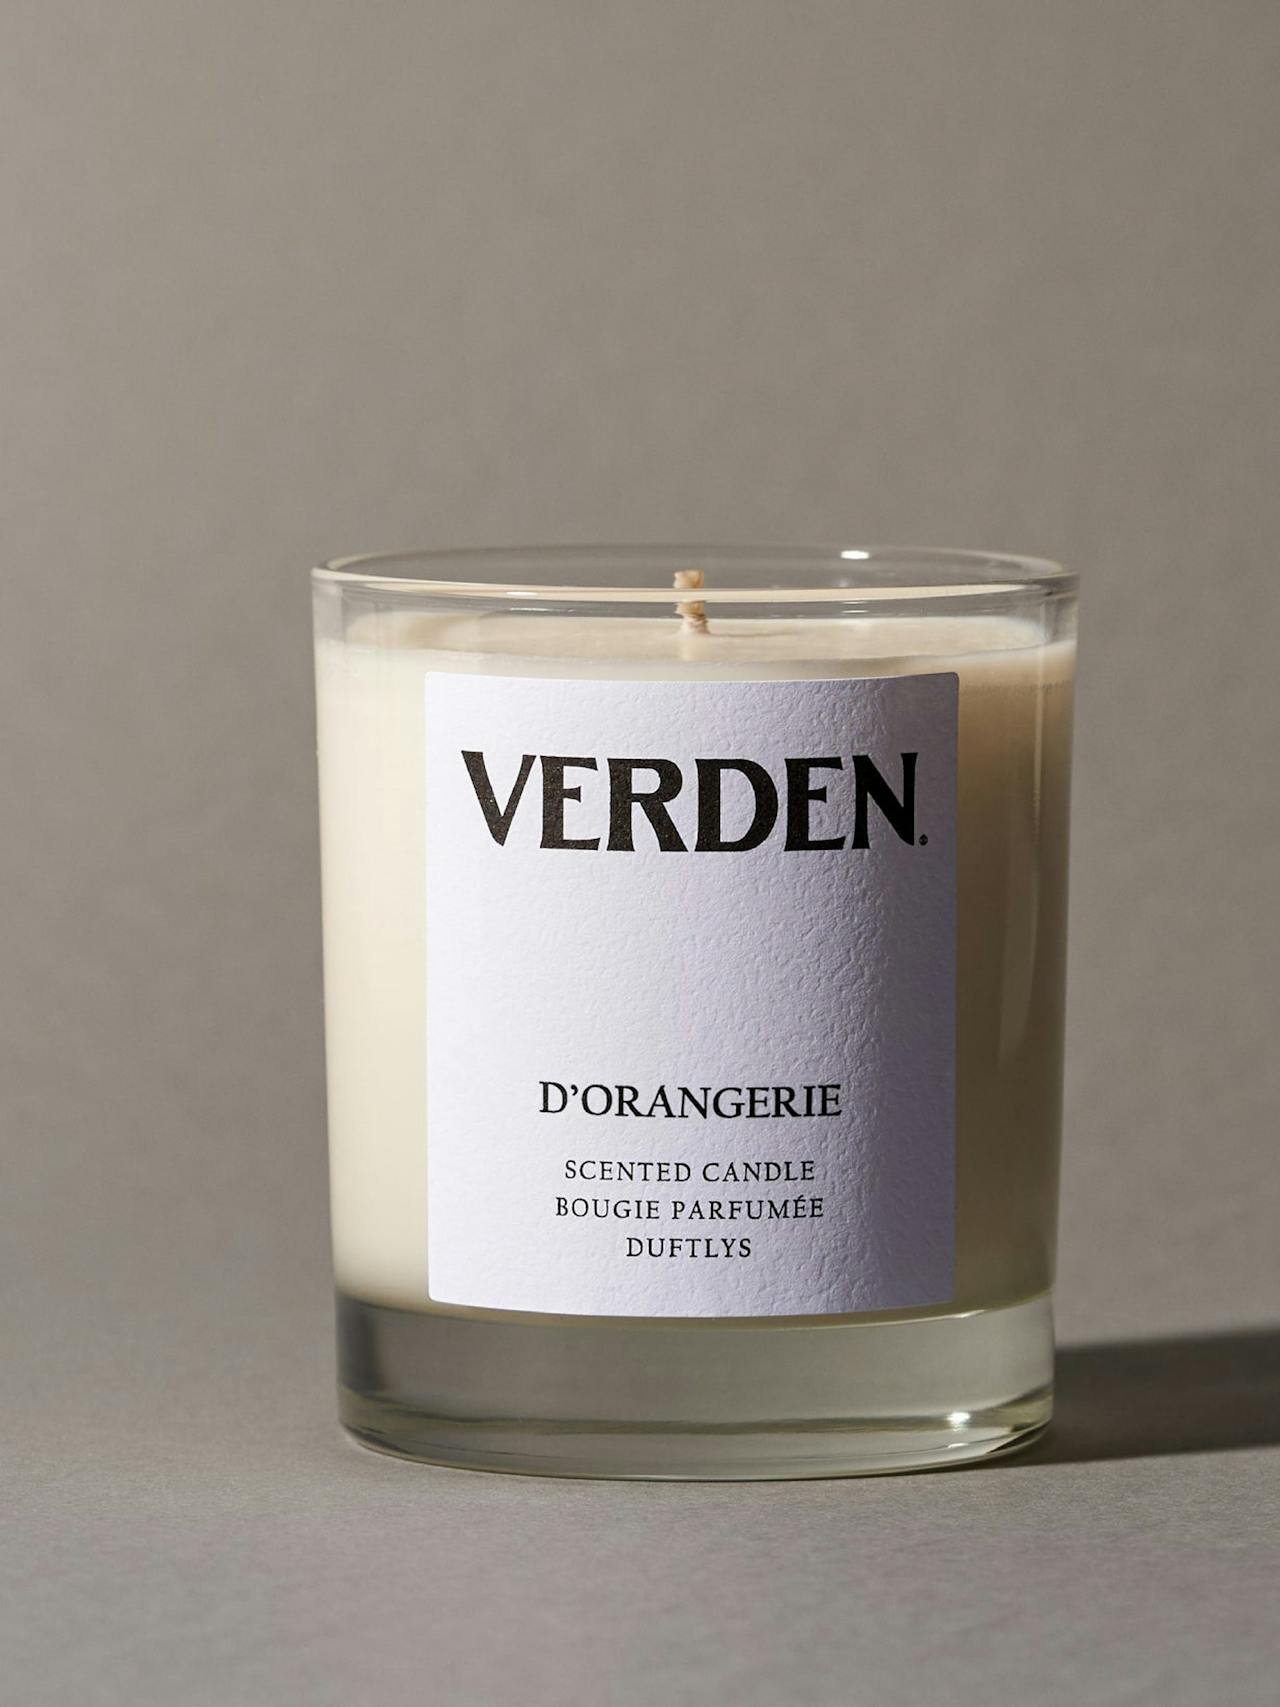 d'Orangerie scented candle